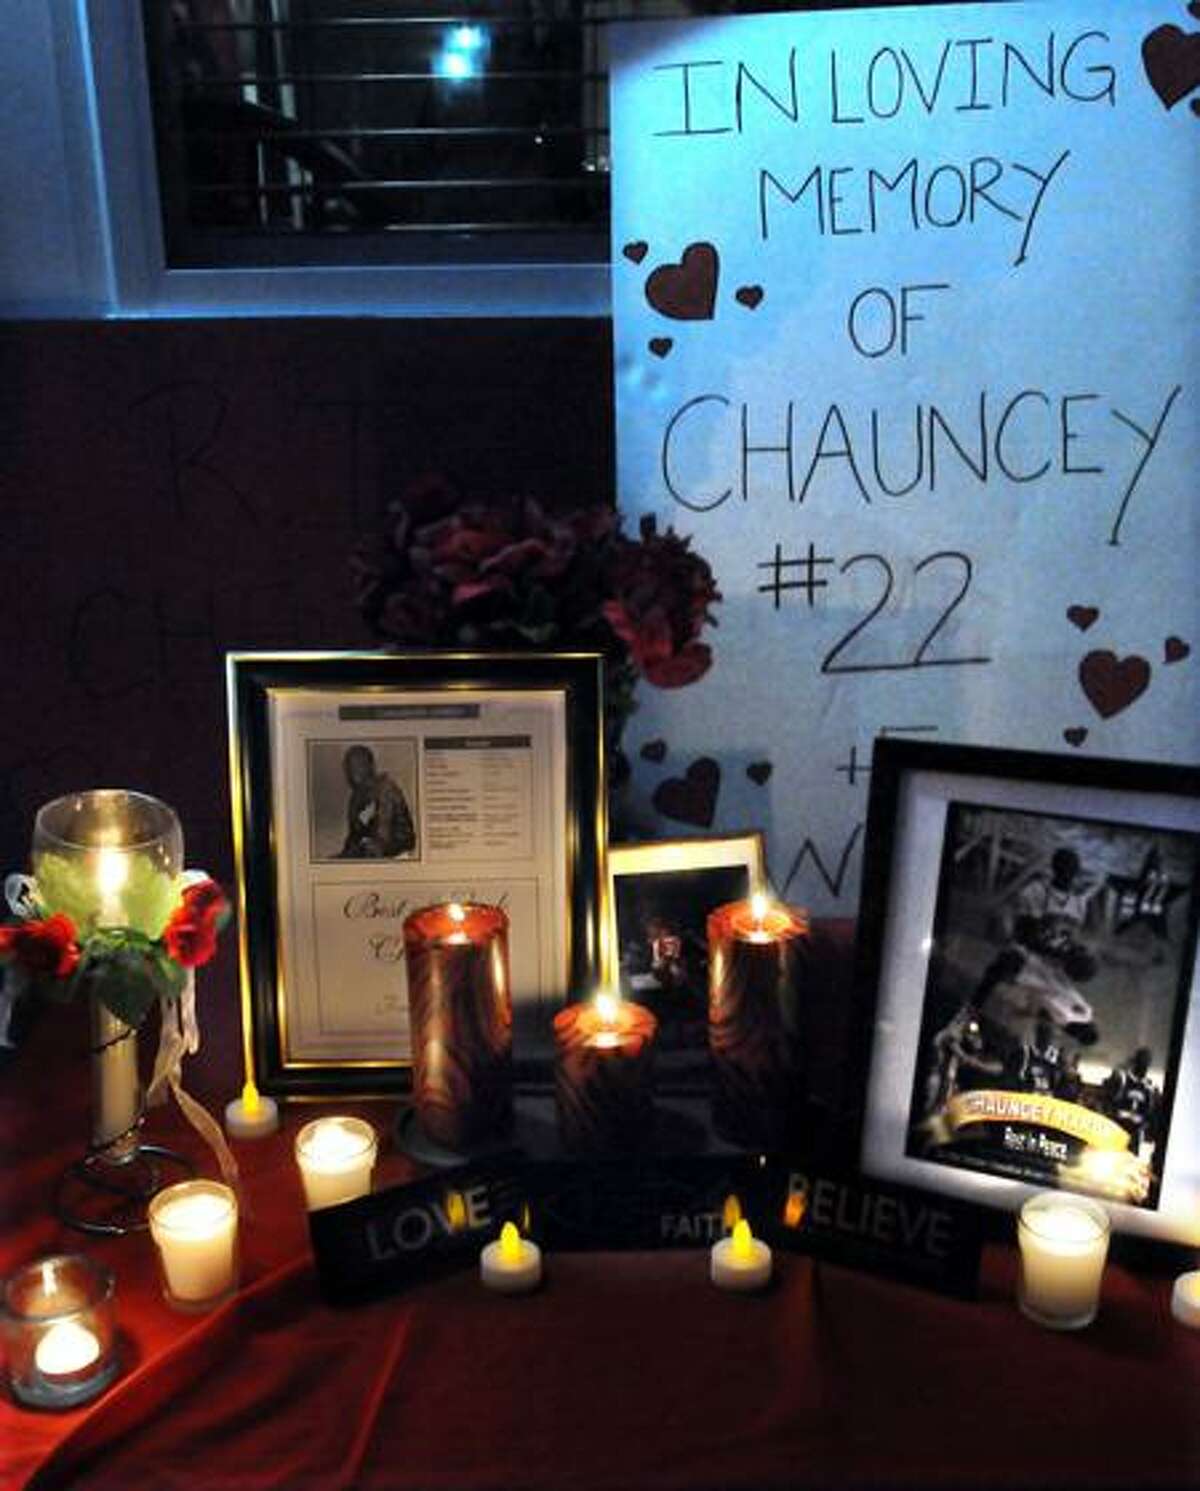 The family and friends of Chauncey Hardy near his childhood home in Middletown to call attention to the questions surrounding his death in Romania. A makeshift memorial by the back door of Chauncey's aunt's house. Photo by Mara Lavitt/New Haven Register10/15/11